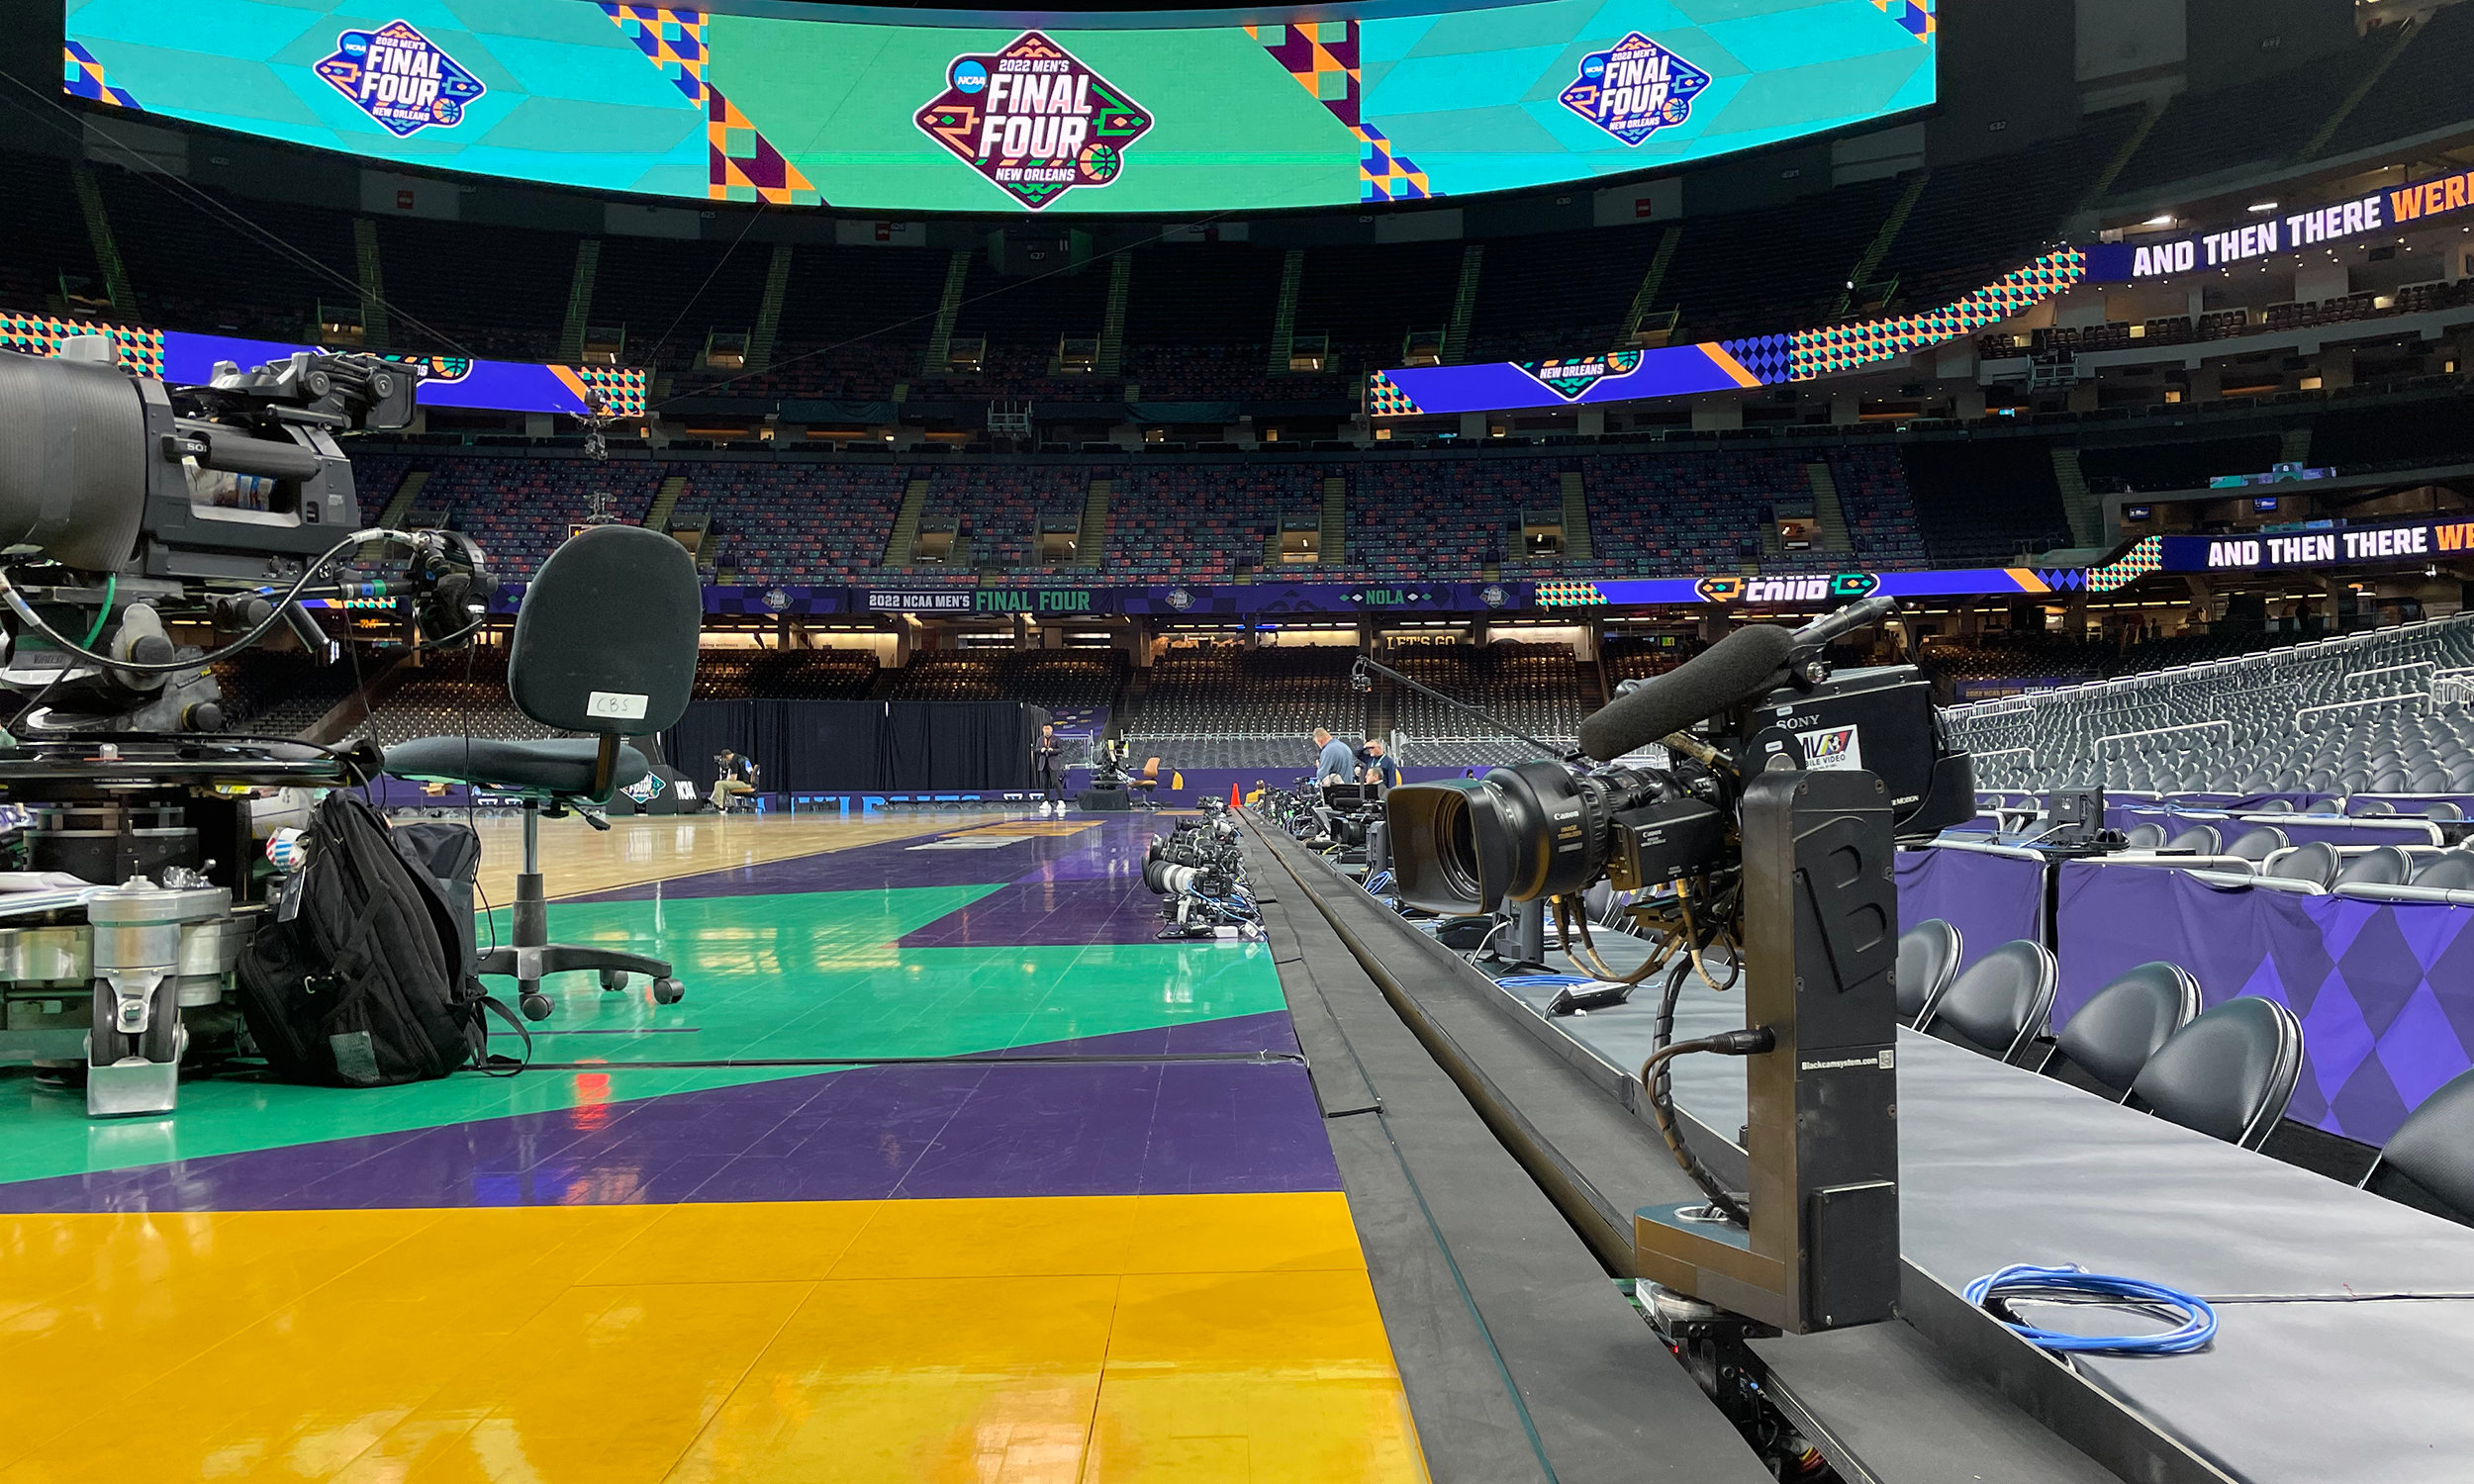 Live From Mens Final Four CBS, Turner Bring Their Best For an NCAA Championship for the Ages